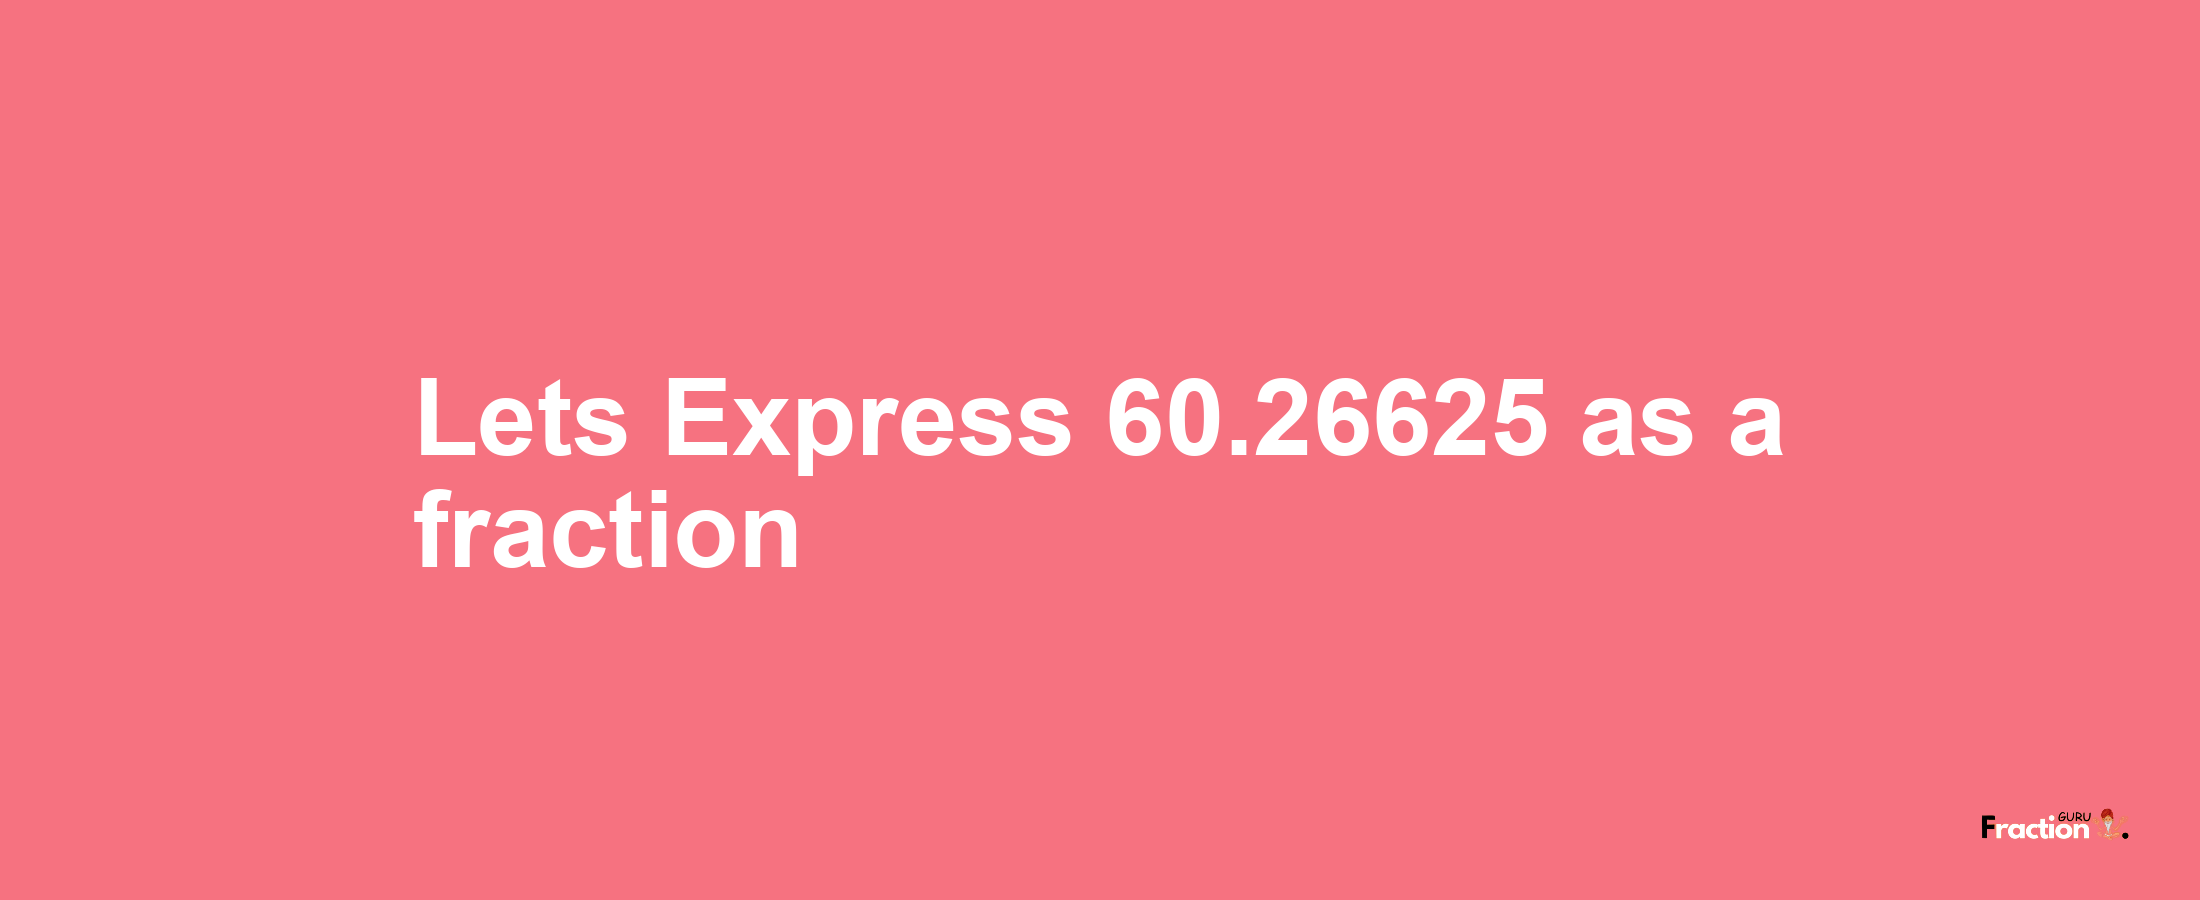 Lets Express 60.26625 as afraction